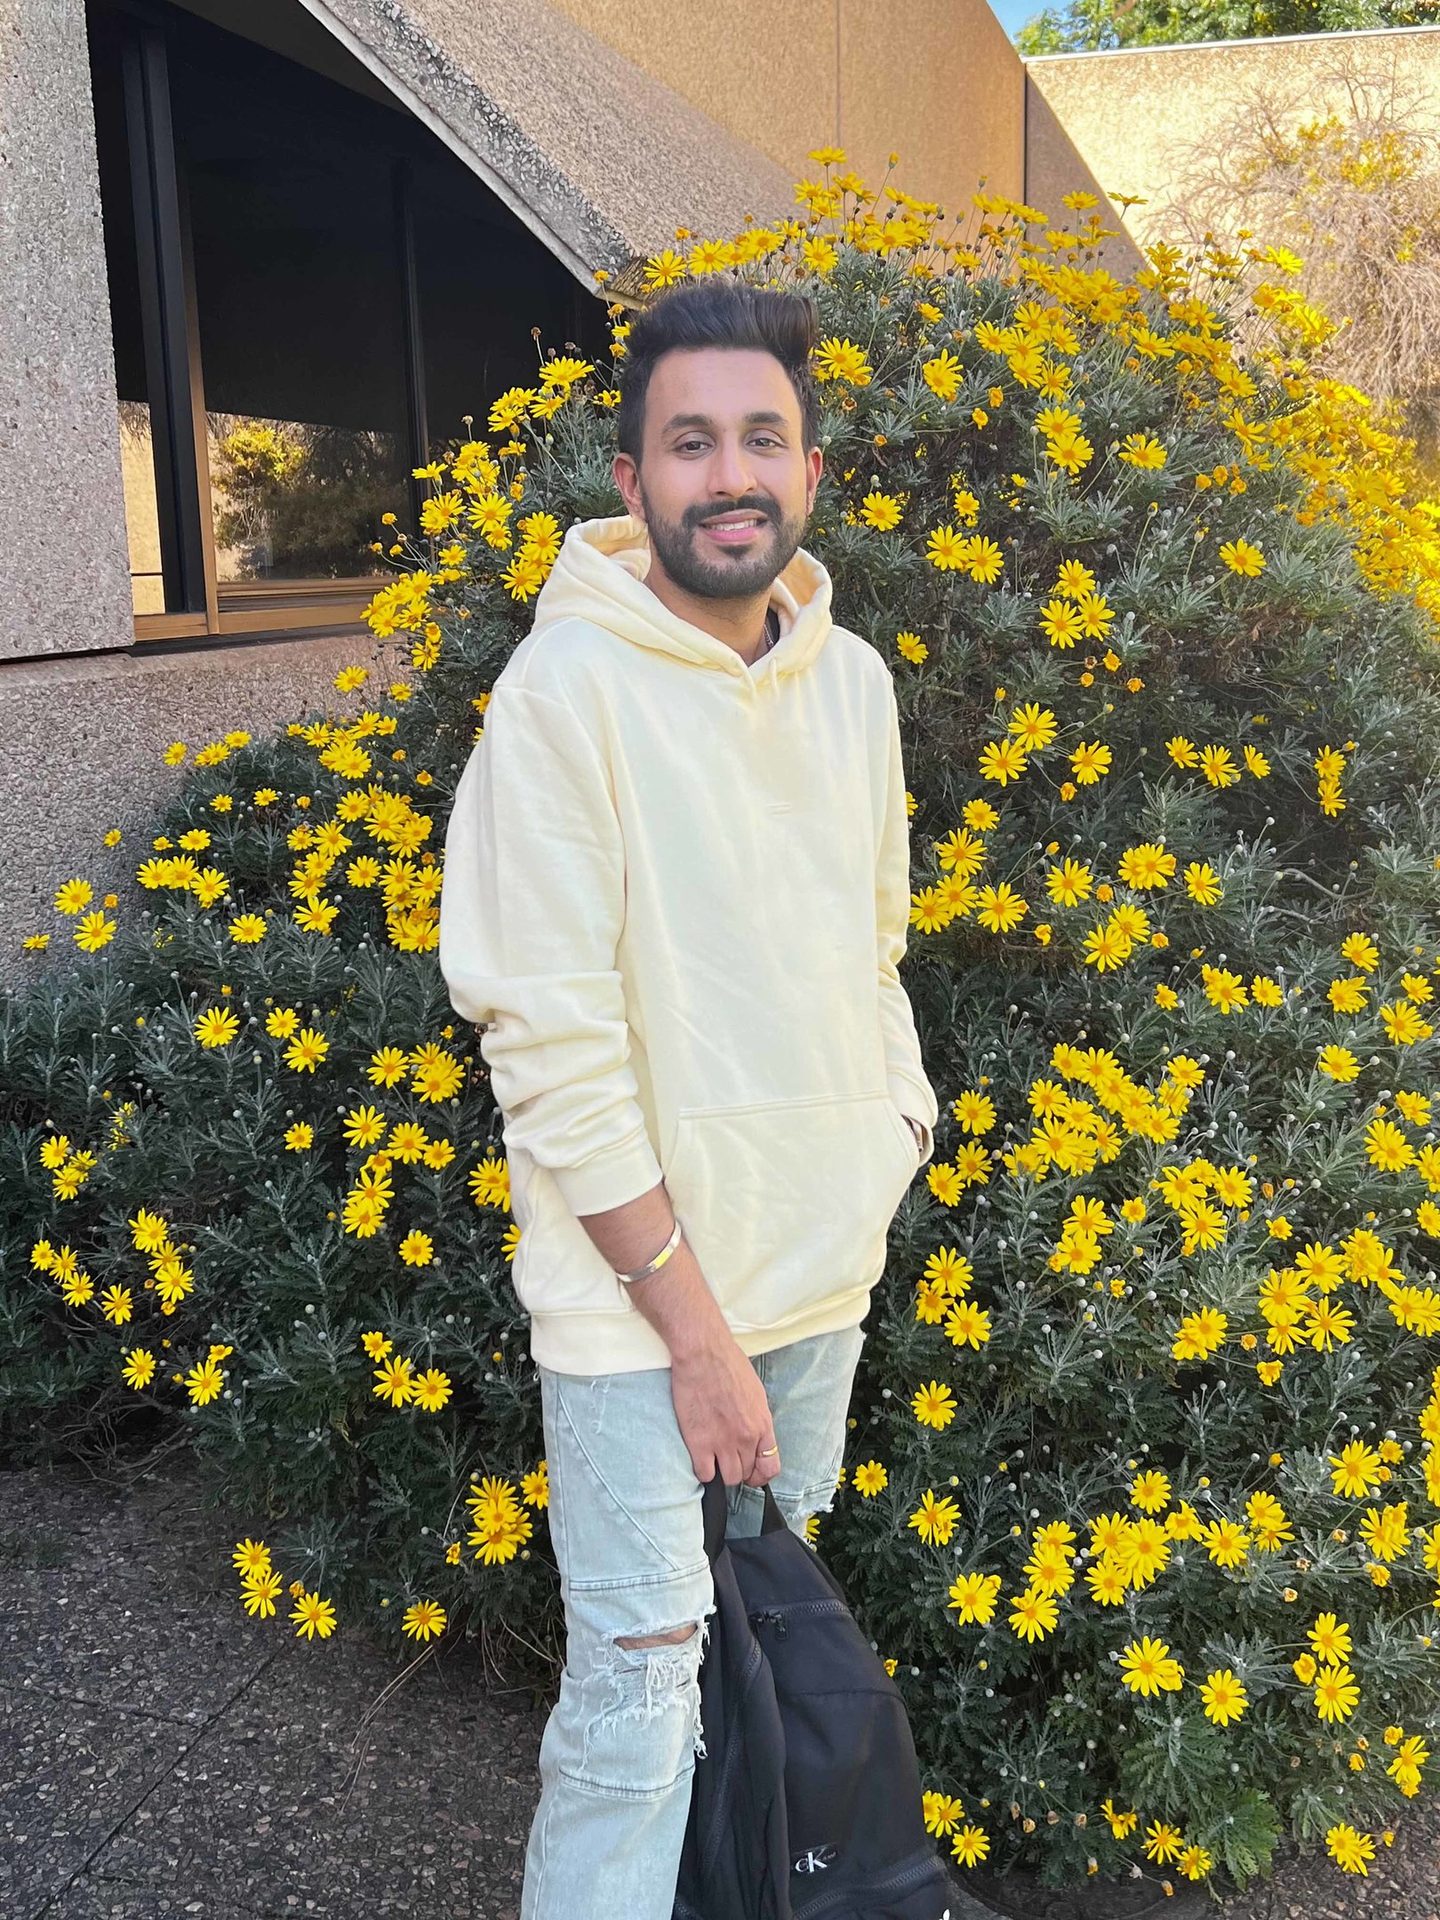 People in nature, Flower, Smile, Plant, Yellow, Standing, Happy